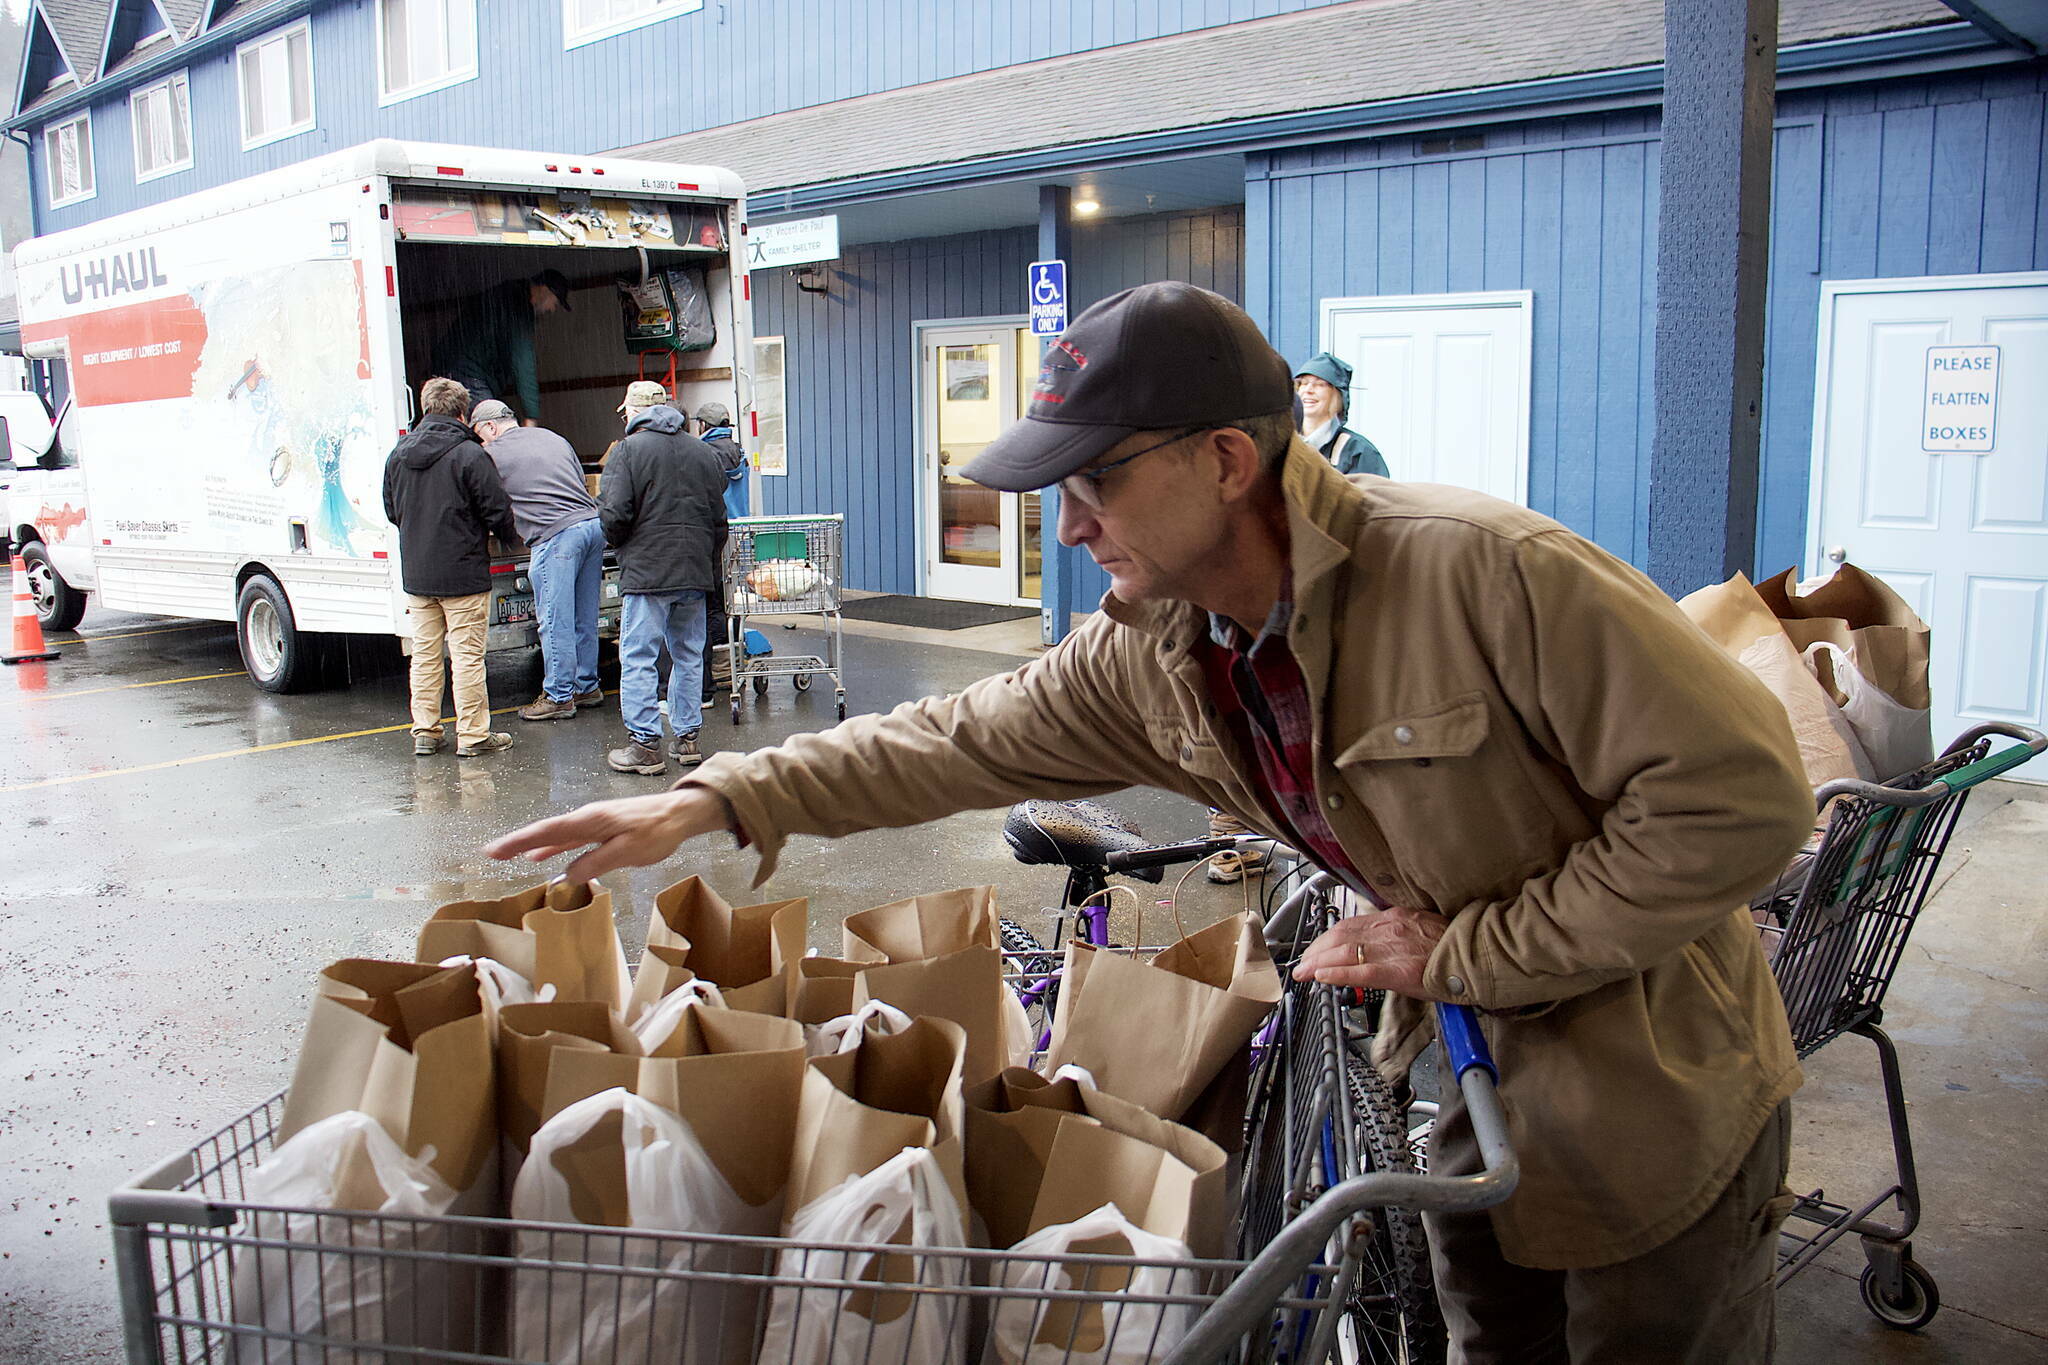 Joe Pagenkopf counts bags of food in a shopping cart at the St. Vincent de Paul Juneau complex on Saturday, Nov. 18, before heading out to deliver Thanksgiving food baskets to local residents. He said it is his first time making such deliveries, which he was motivated to get after getting help when his home was nearly destroyed by the record flooding of Suicide Basin earlier this year. (Mark Sabbatini / Juneau Empire file photo)